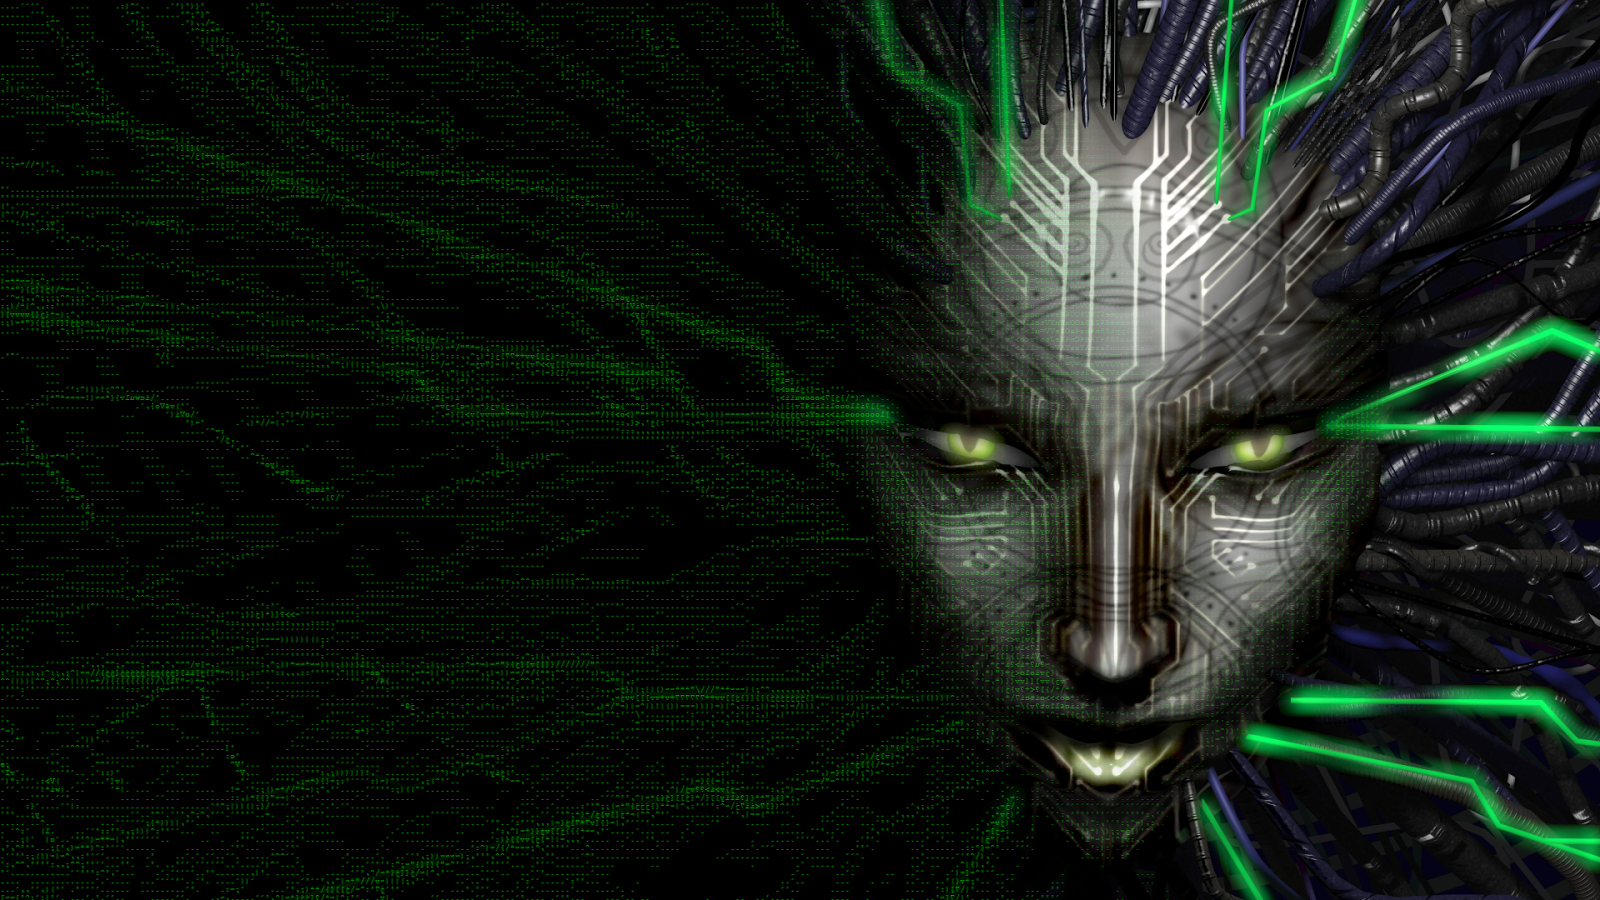 Why Not Updating A System Shock Wallpaper For HD Resolutions In